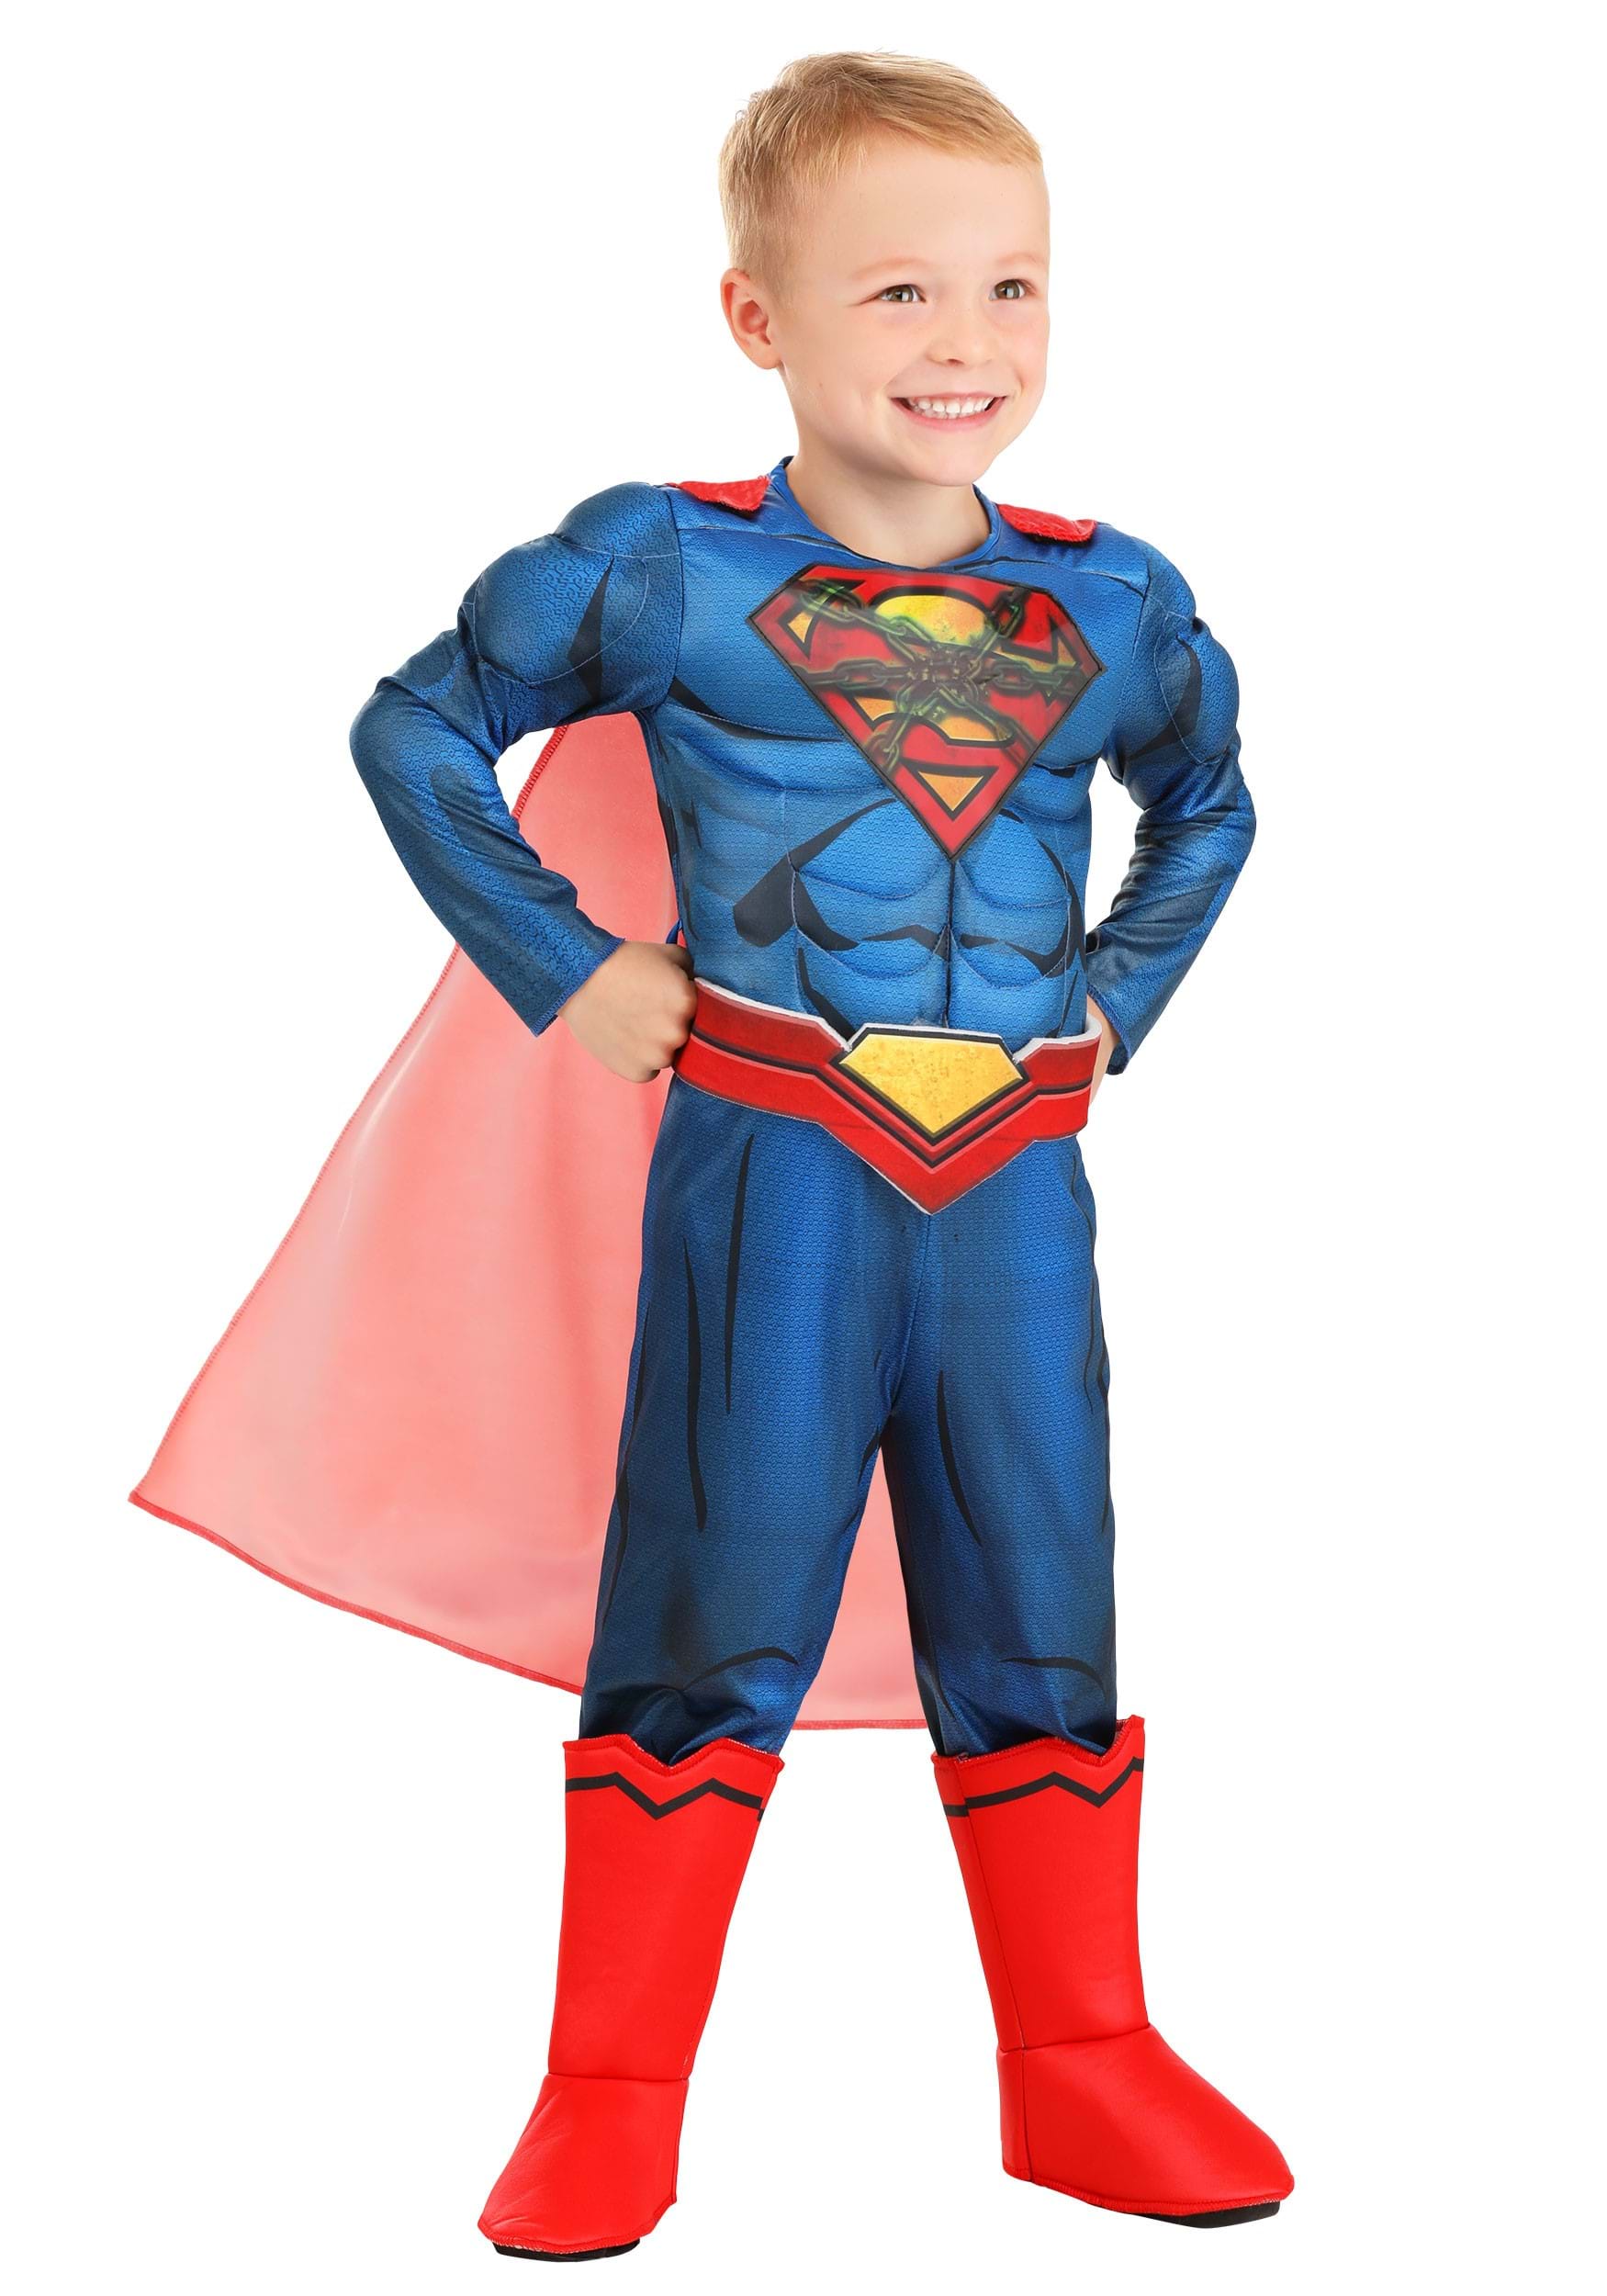 Photos - Fancy Dress DC Jerry Leigh  Comics Superman Deluxe Toddler Costume Red/Blue JLJLF10 